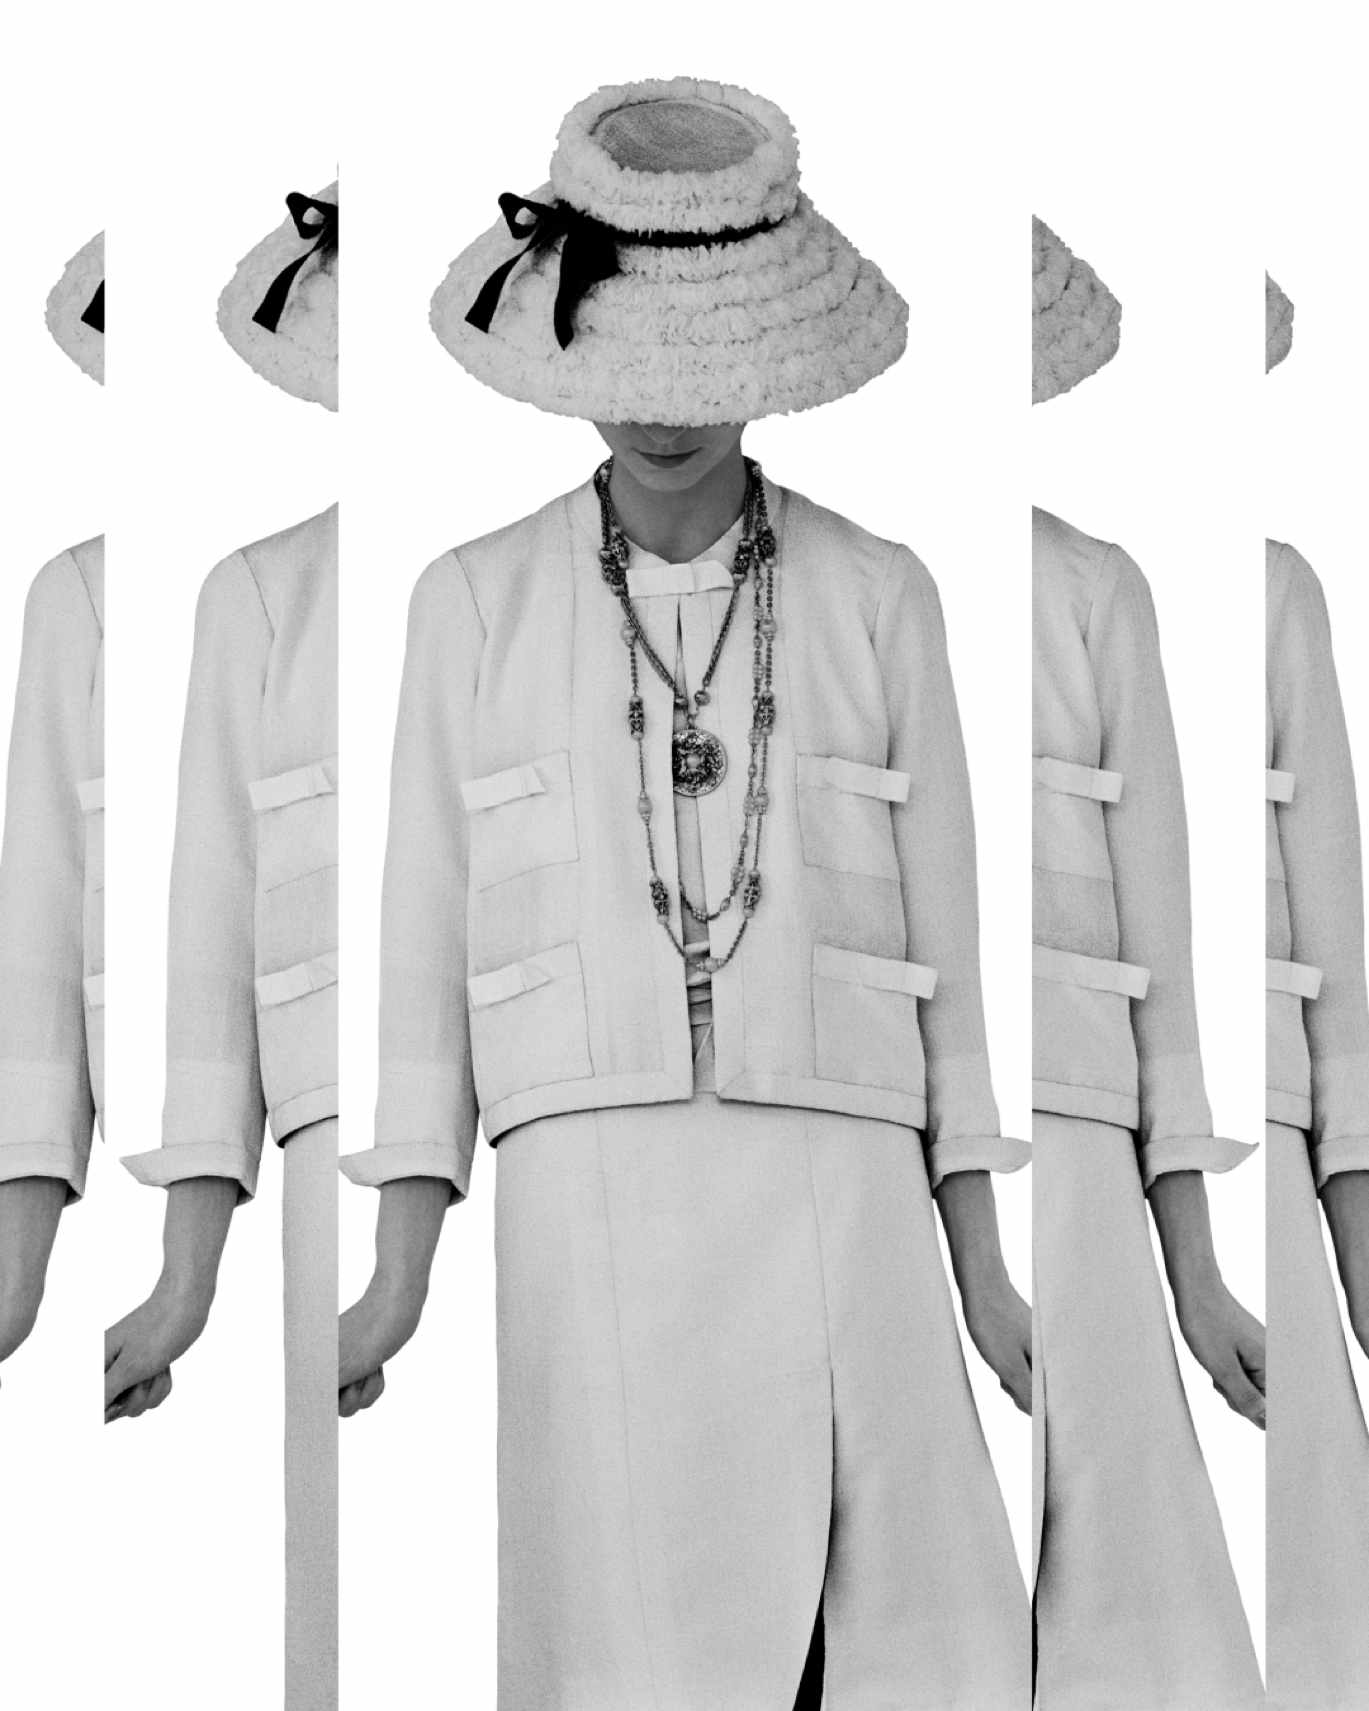 V&A to host exhibition on Coco Chanel's career and designs, Chanel